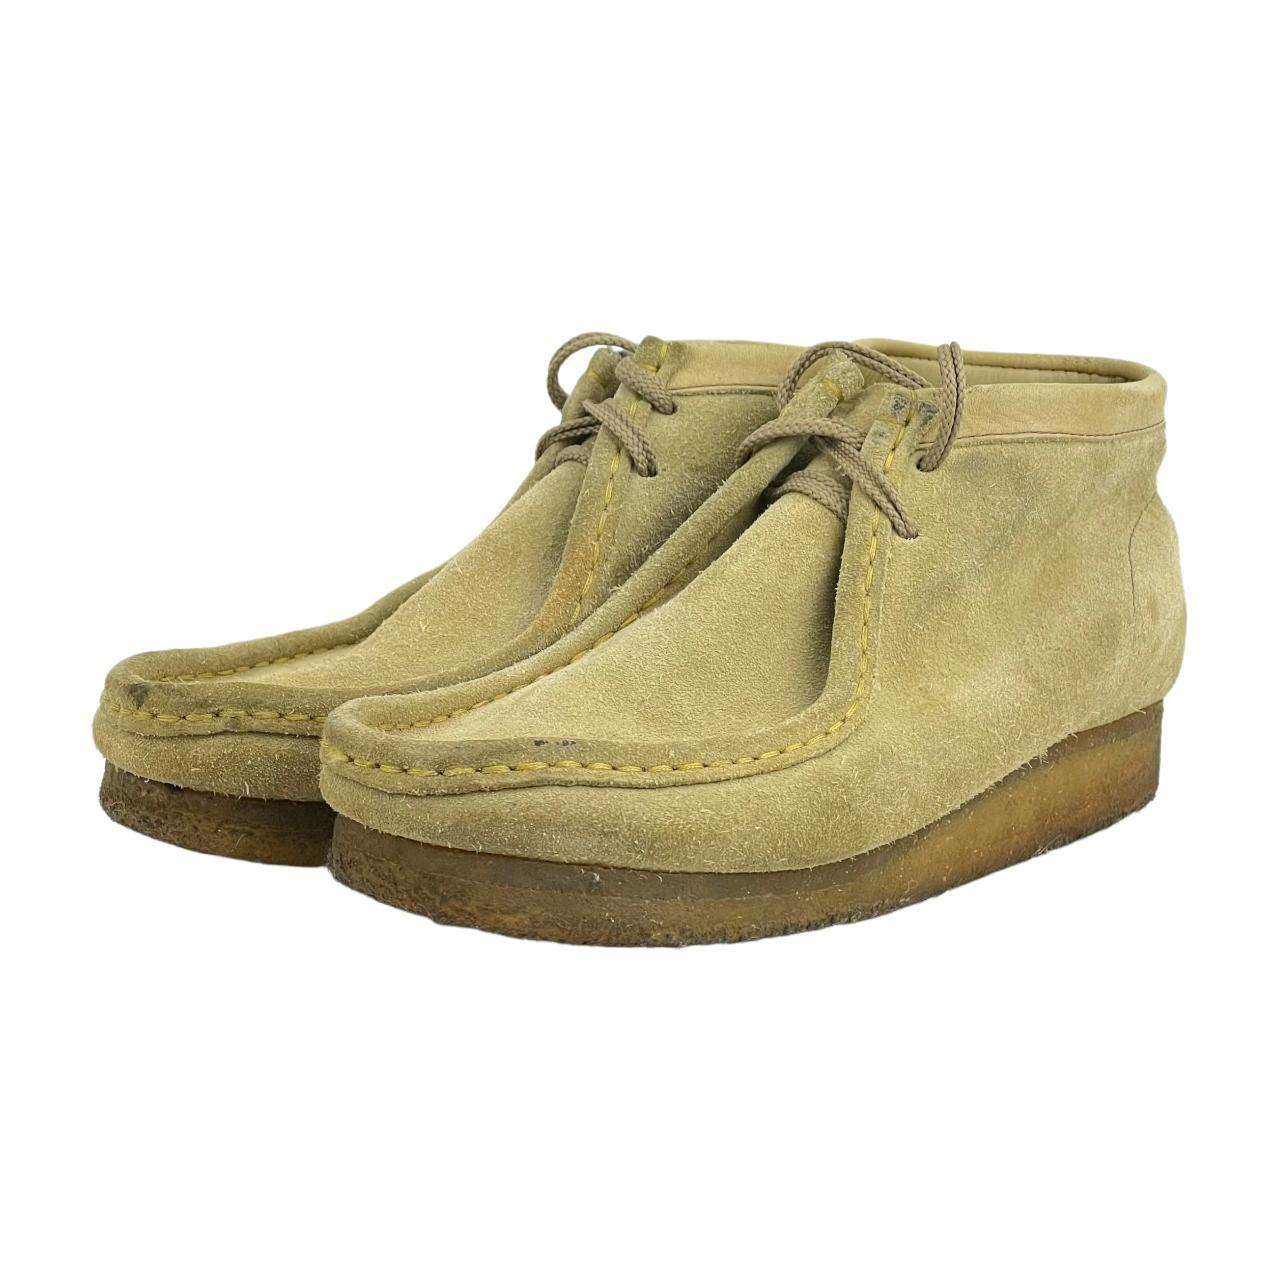 Product Image 1 - Clarks Wallabees Maple Crepe Sole